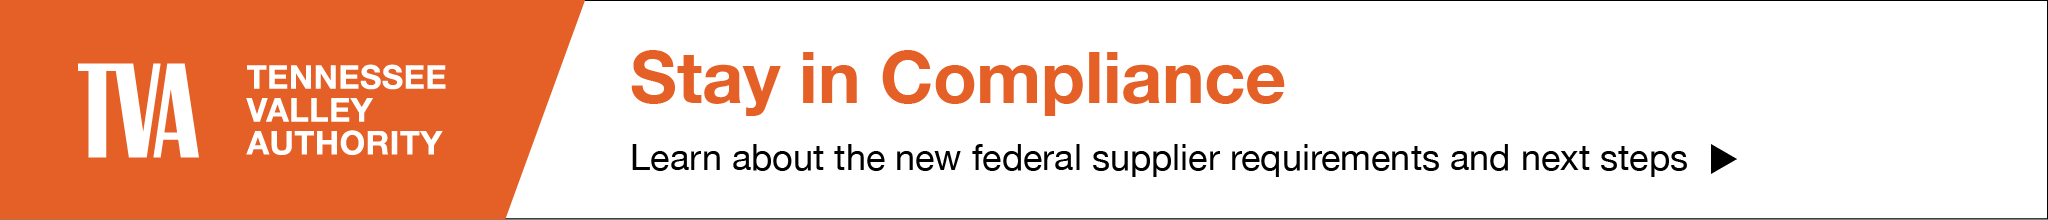 Stay in compliance - Learn more about the federal supplier requirements and next steps